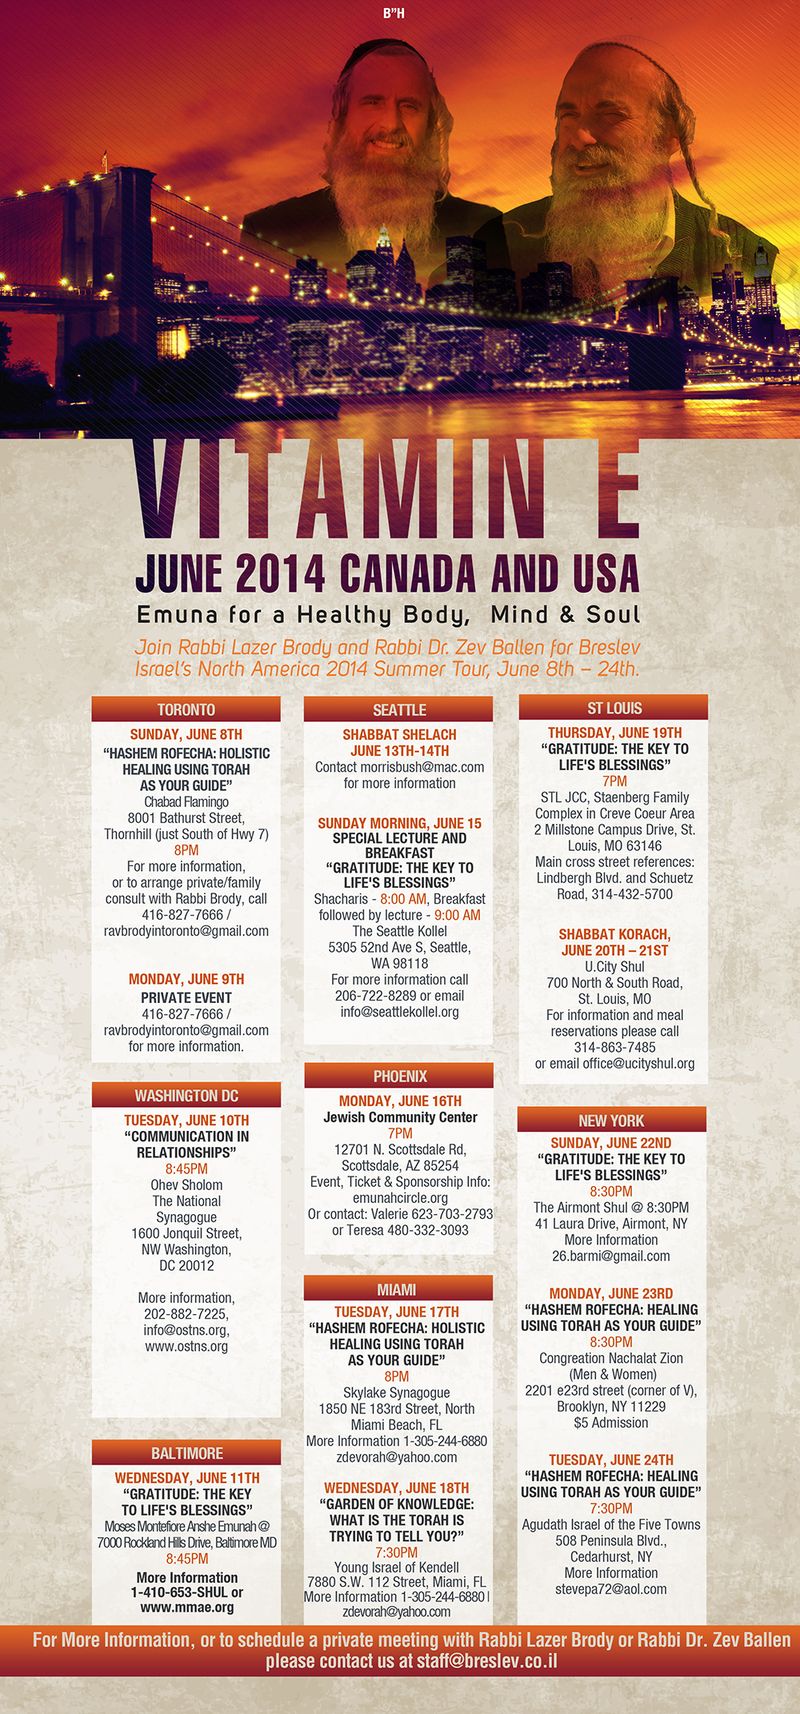 VITAMIN E June 2014 Canada and USA<br />Emuna for a Heathy Body, Mind & Soul<br />Join Rabbi Lazer Bordy and Rabbi Dr. Zev Ballen for Breslev Israel's North American 2014 summer Tour, June 8th -24th